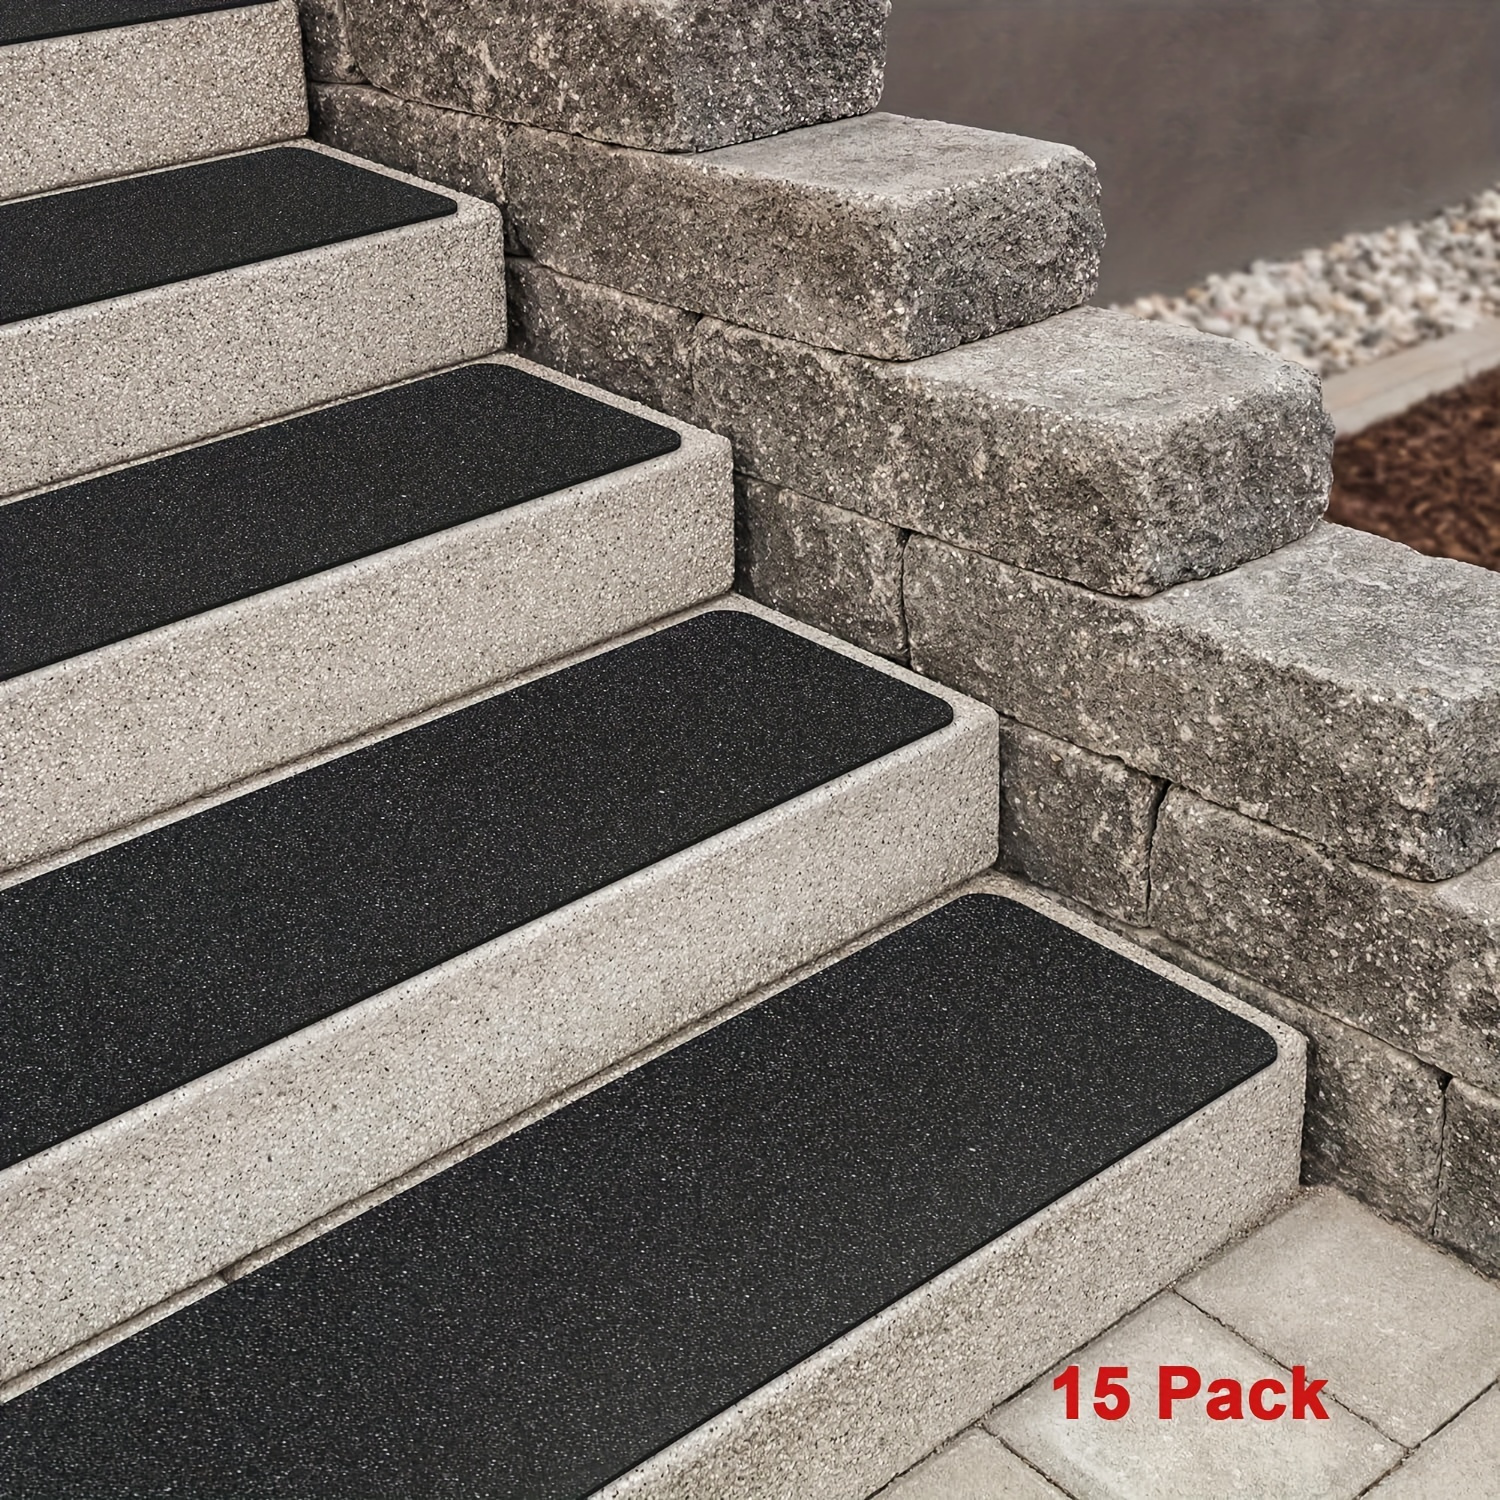 

15pcs Non Slip Outdoor Stair Treads, 4x30", Black Pre-cut 80 Grit Anti Slip Grip Tapes, Non Skid Heavy Duty Traction Adhesive Step Stripes For Staircase, Skateborad And Deck